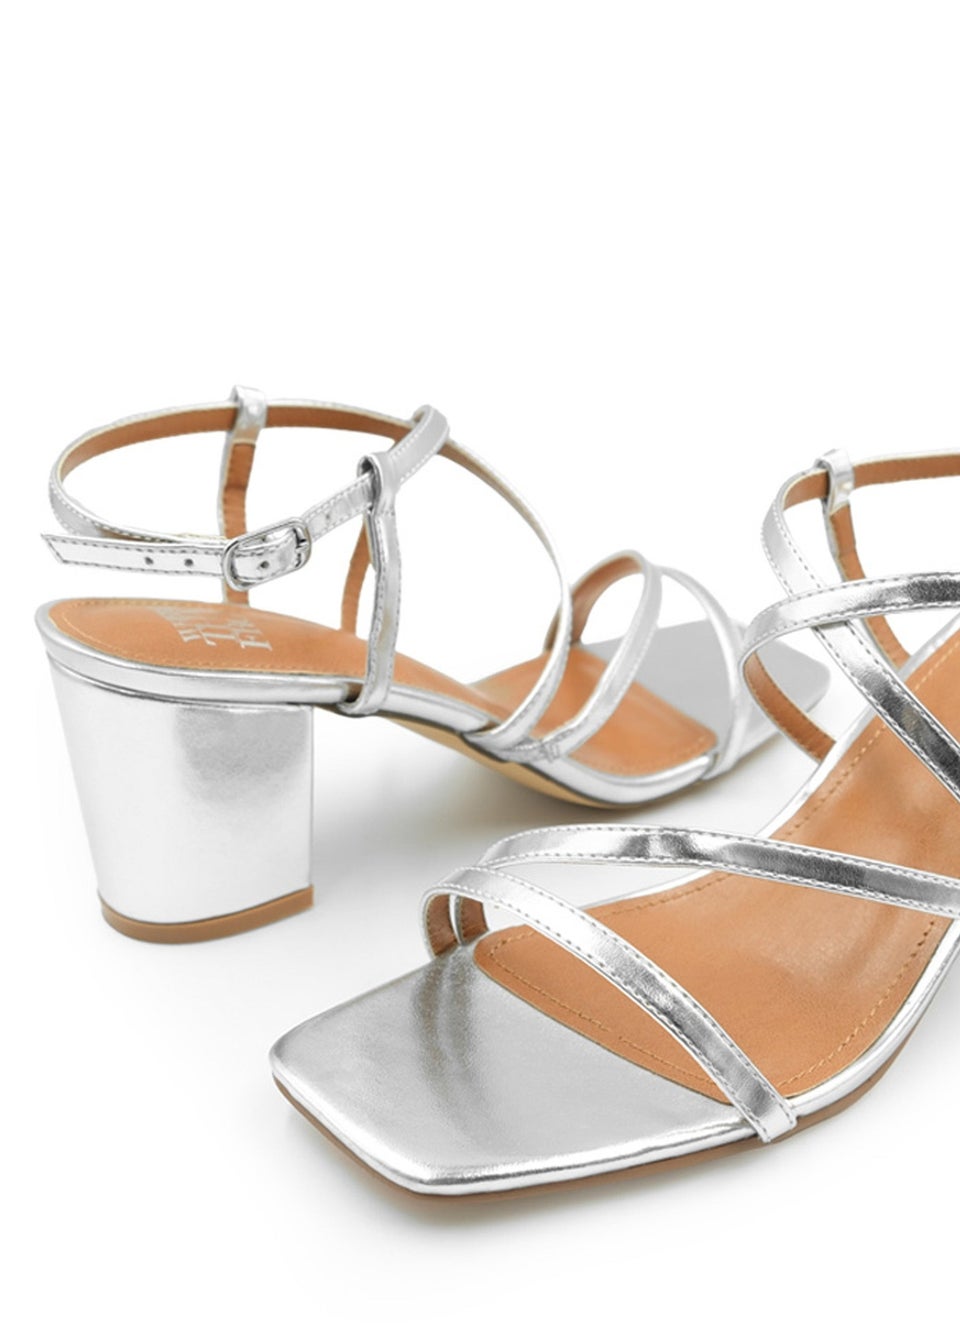 Where's That From Silver Sidra Wide Metallic Block Heel Sandals